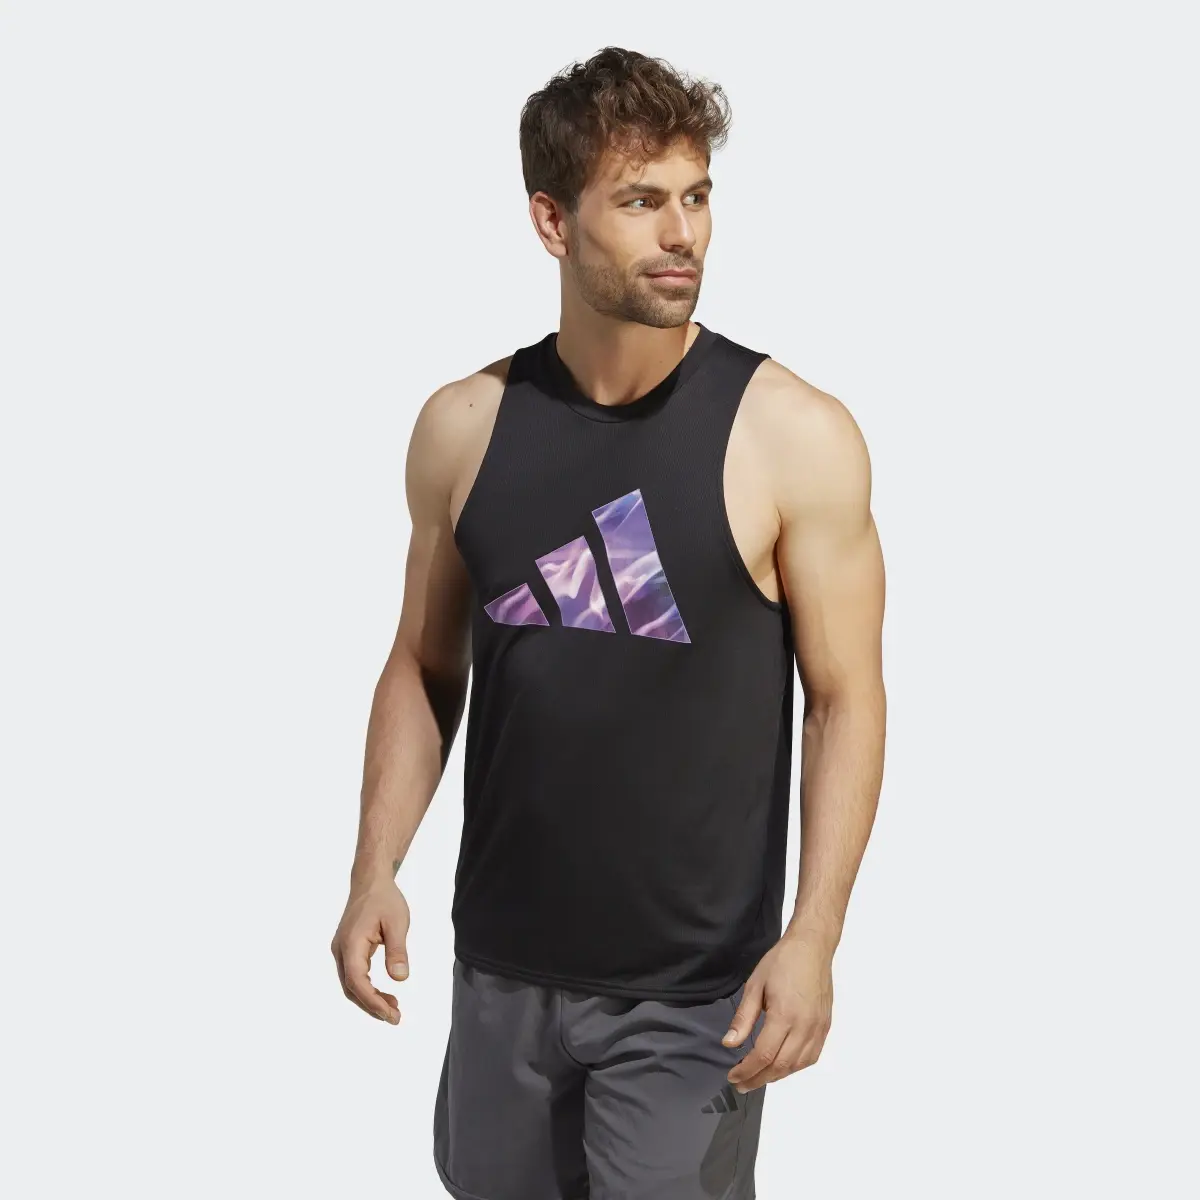 Adidas Designed for Movement HIIT Training Tank Top. 2